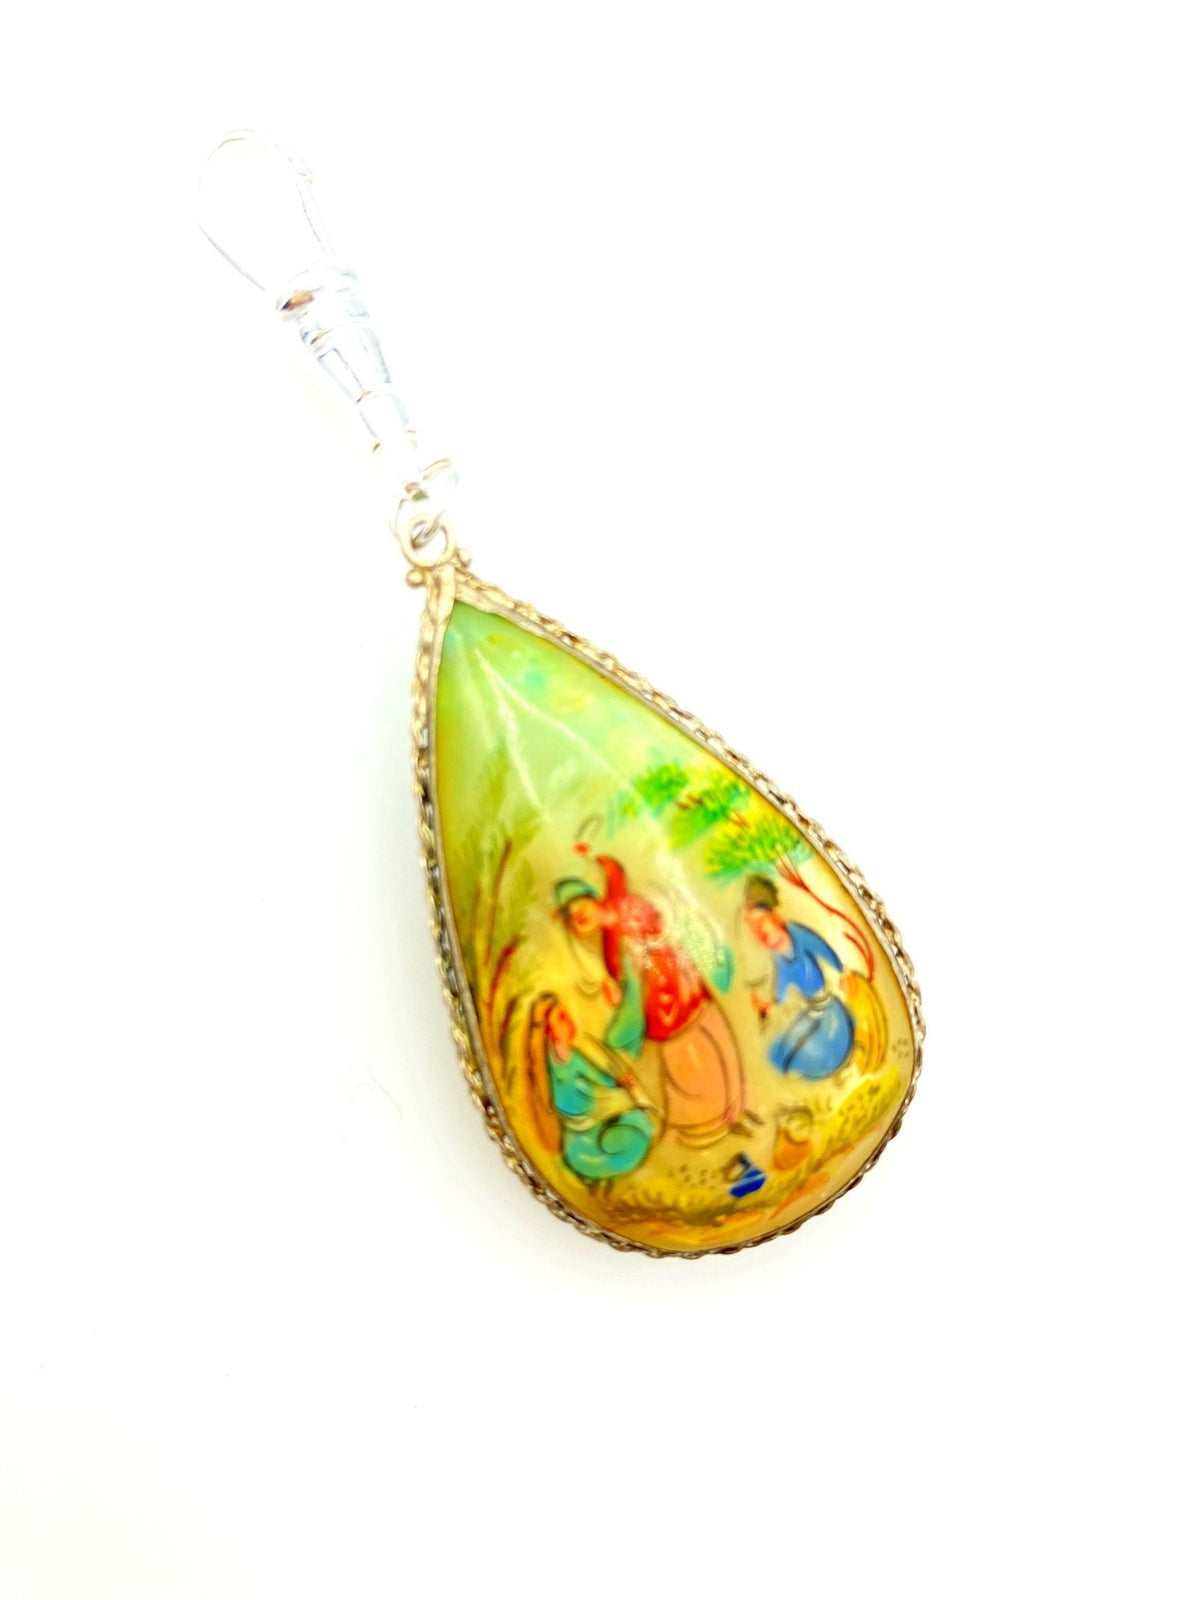 Teardrop Hand Painted Nature Scene Charm - 24 Wishes Vintage Jewelry